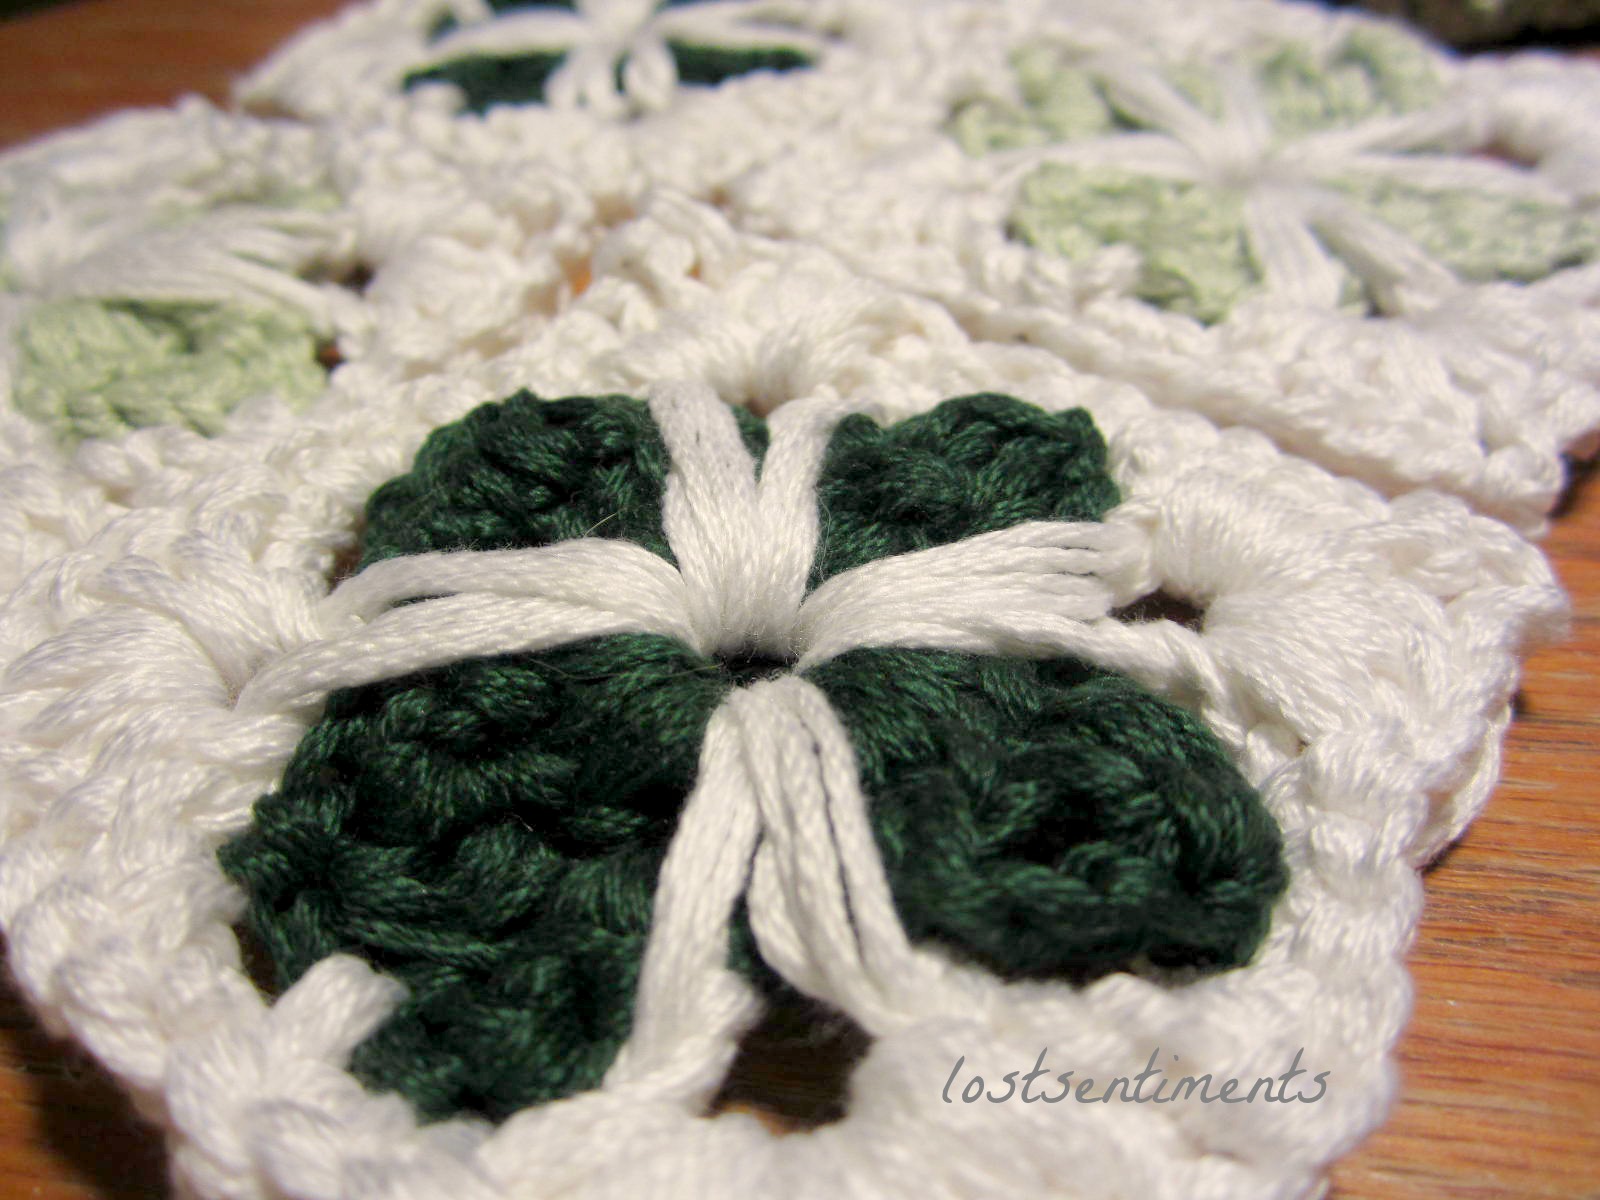 lostsentiments Cathedral  Motif  Granny Square Crochet  